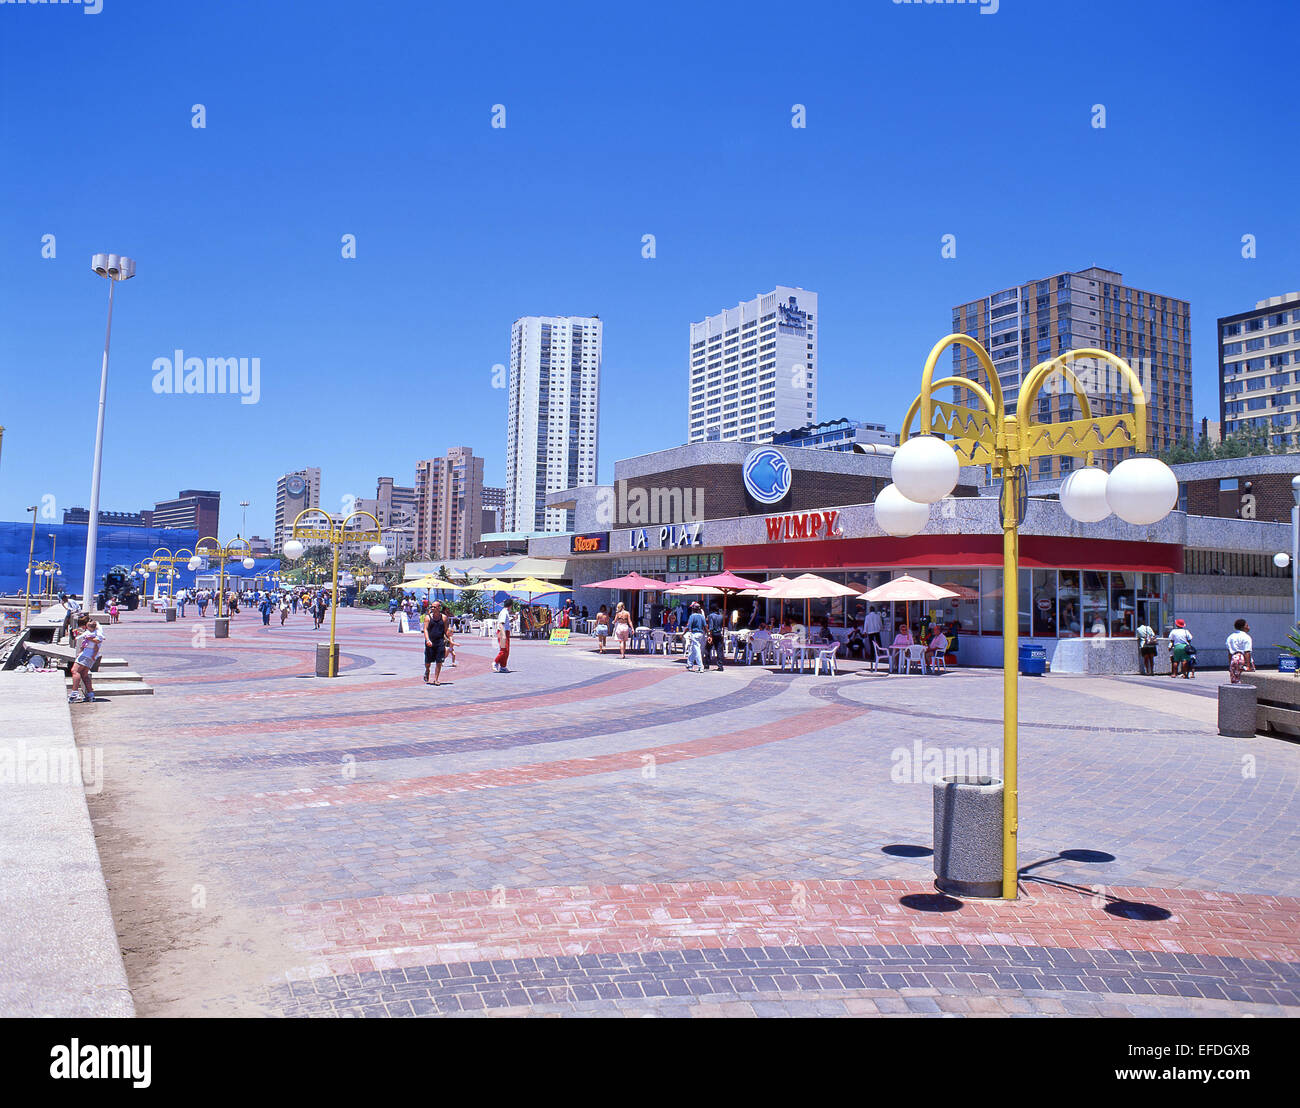 The 'The Golden Mile' beach front promenade, Durban, KwaZulu-Natal Province, South Africa Stock Photo